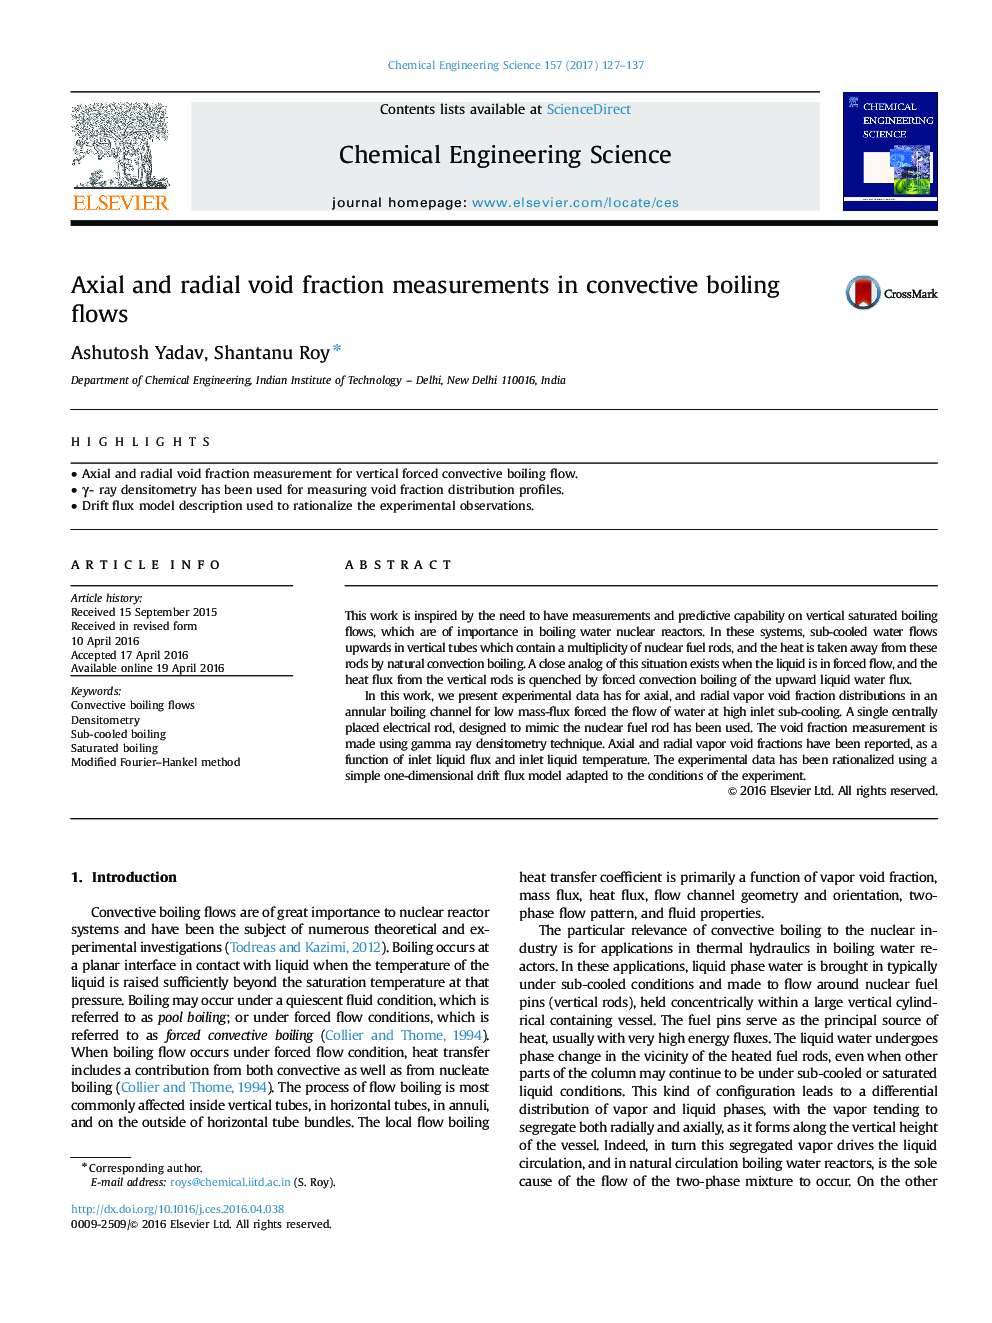 Axial and radial void fraction measurements in convective boiling flows